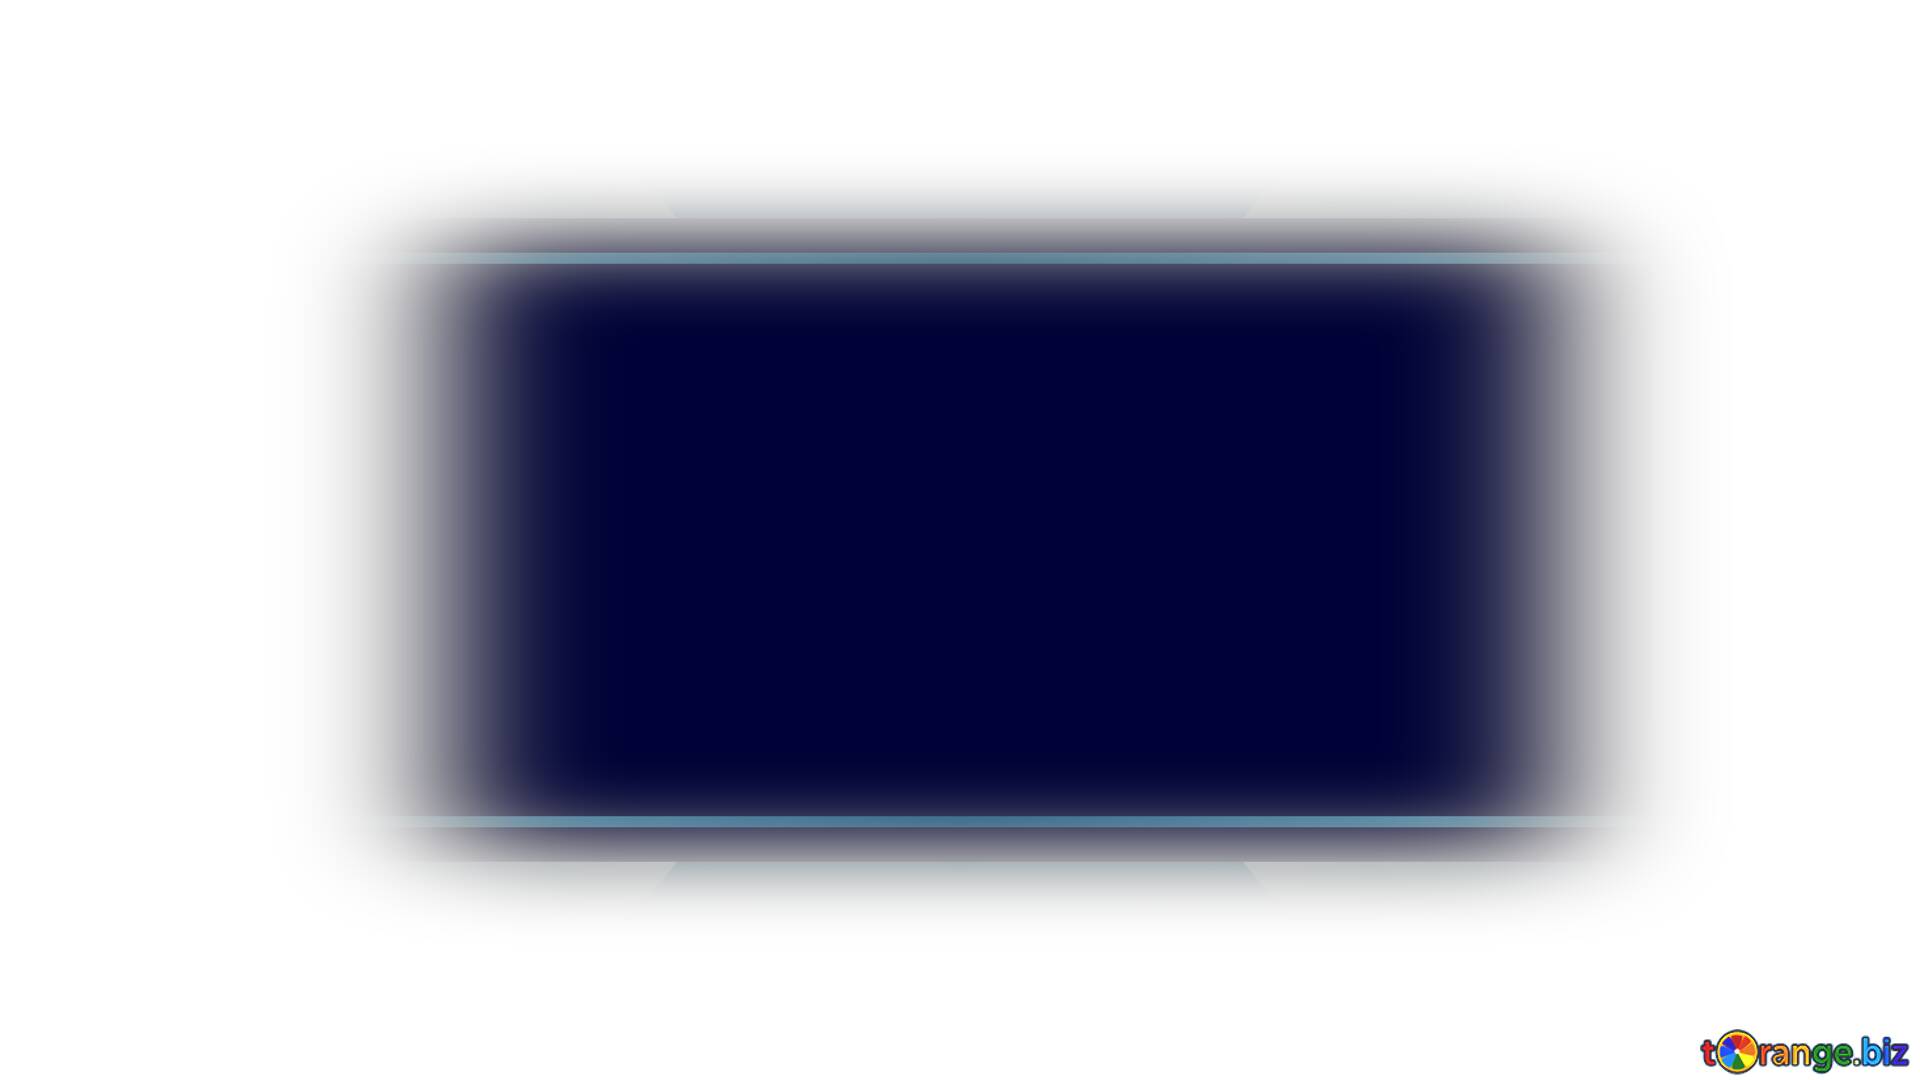 Download free picture Youtube Thumbnail dark blue transparent background on  CC-BY License ~ Free Image Stock  ~ fx №224215